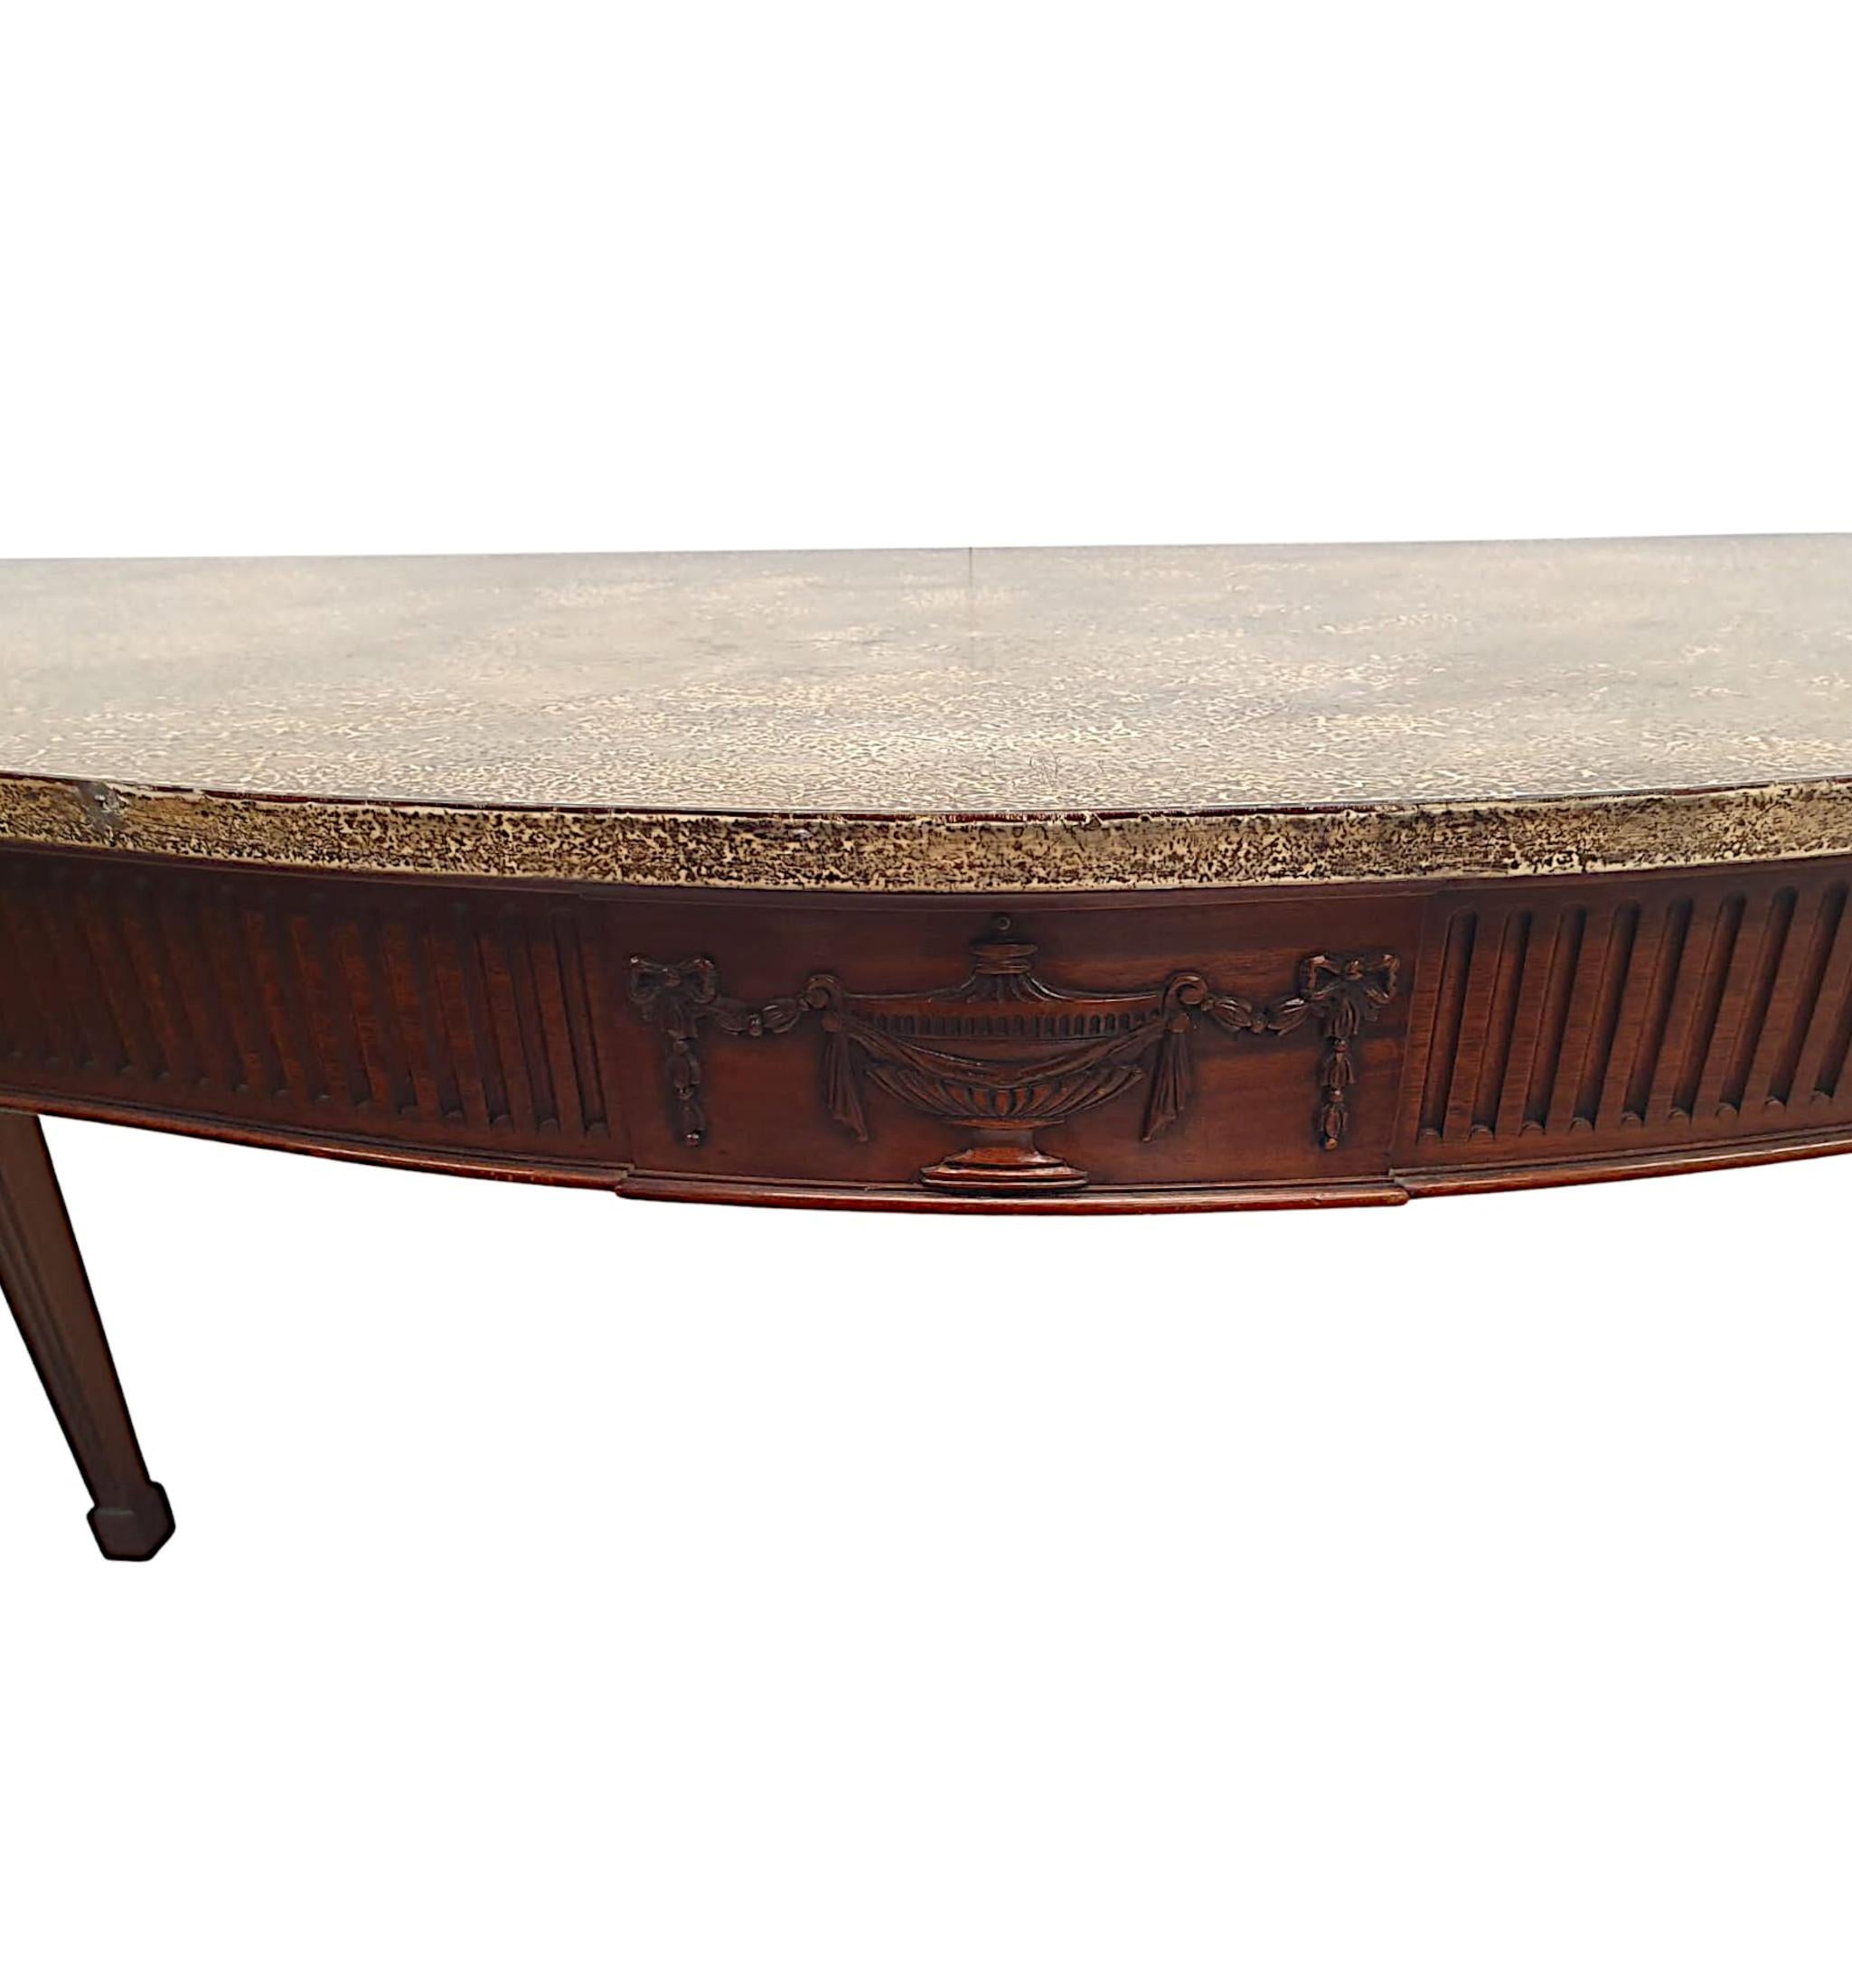 Adam Style A Very Fine 20th Century Adams Design Console or Hall Table For Sale